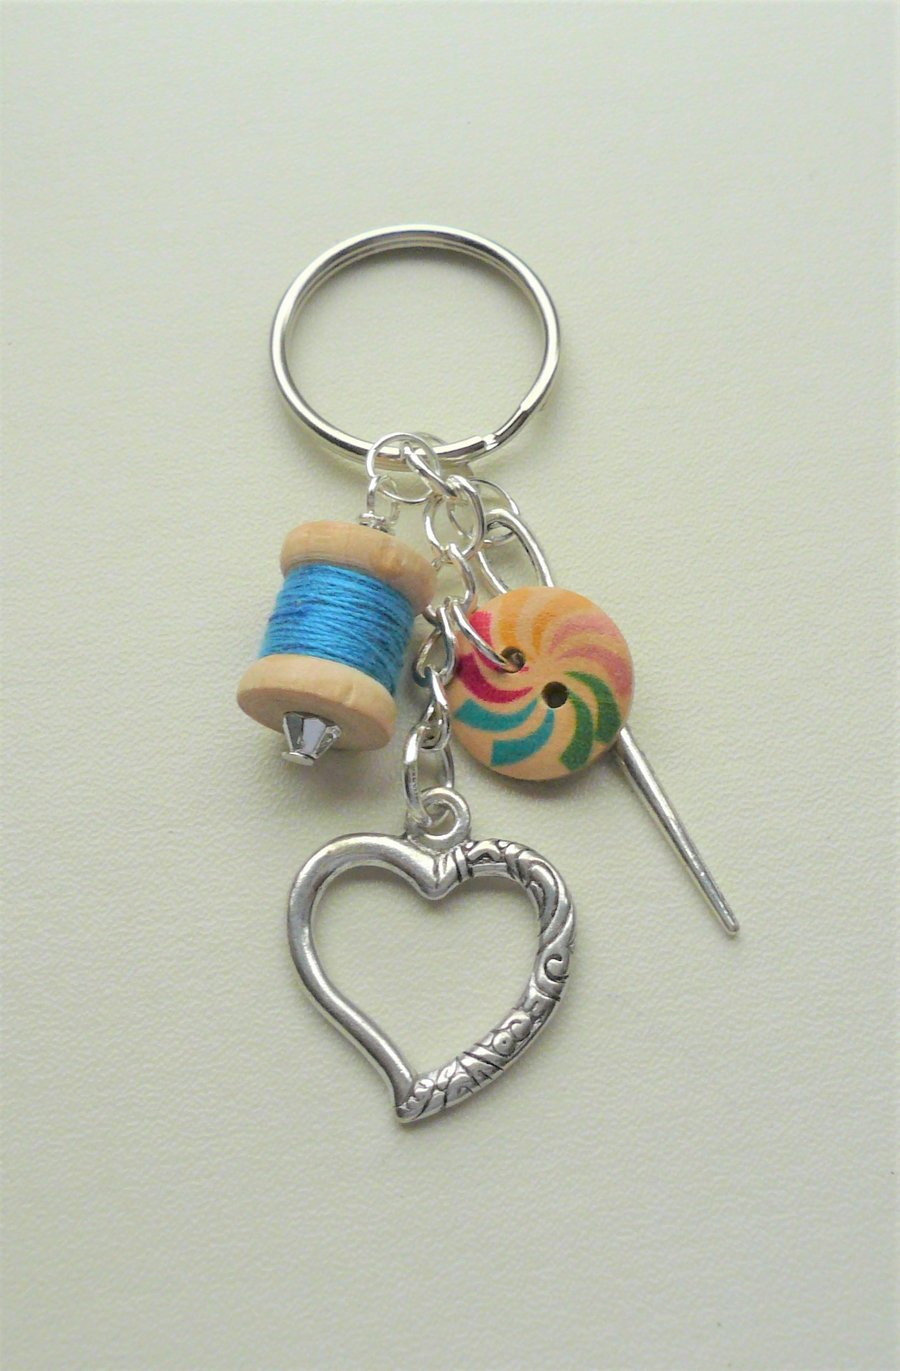 Blue Sewing Keyring or Bag Charm Button Cotton Reel Needle  KCJ4064